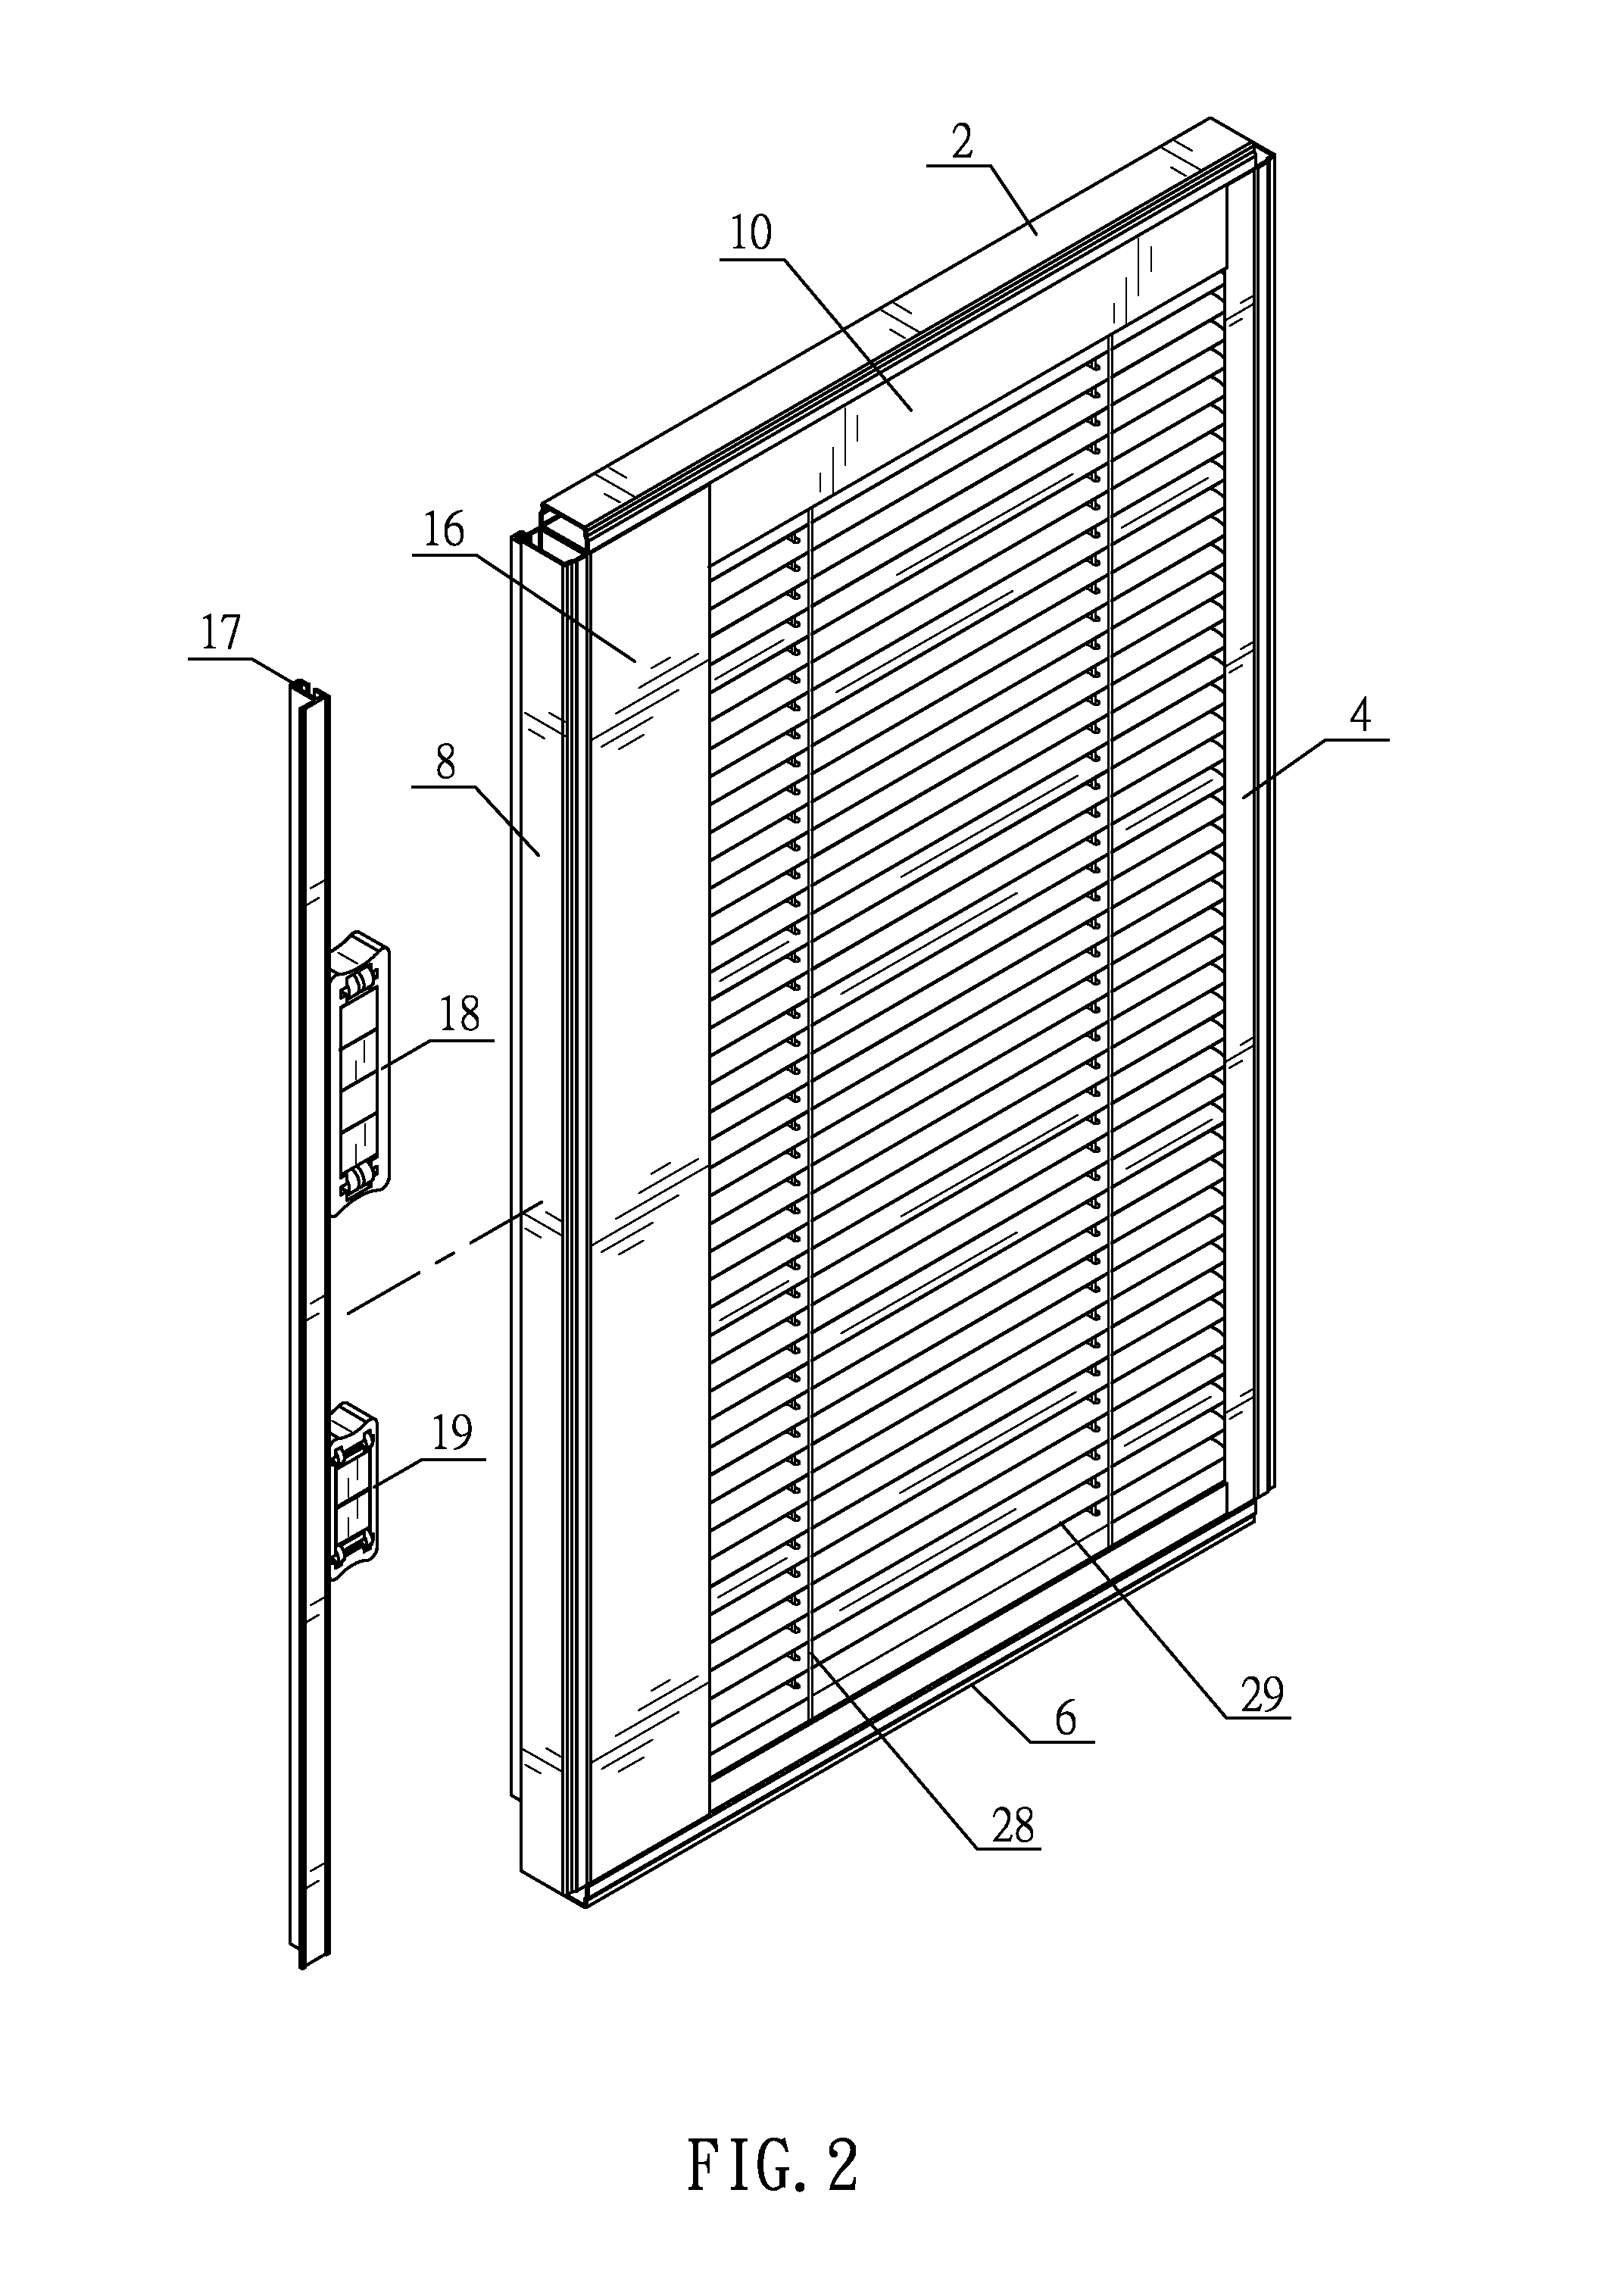 Sealed magnetic-controlled window blind between two panes of glass